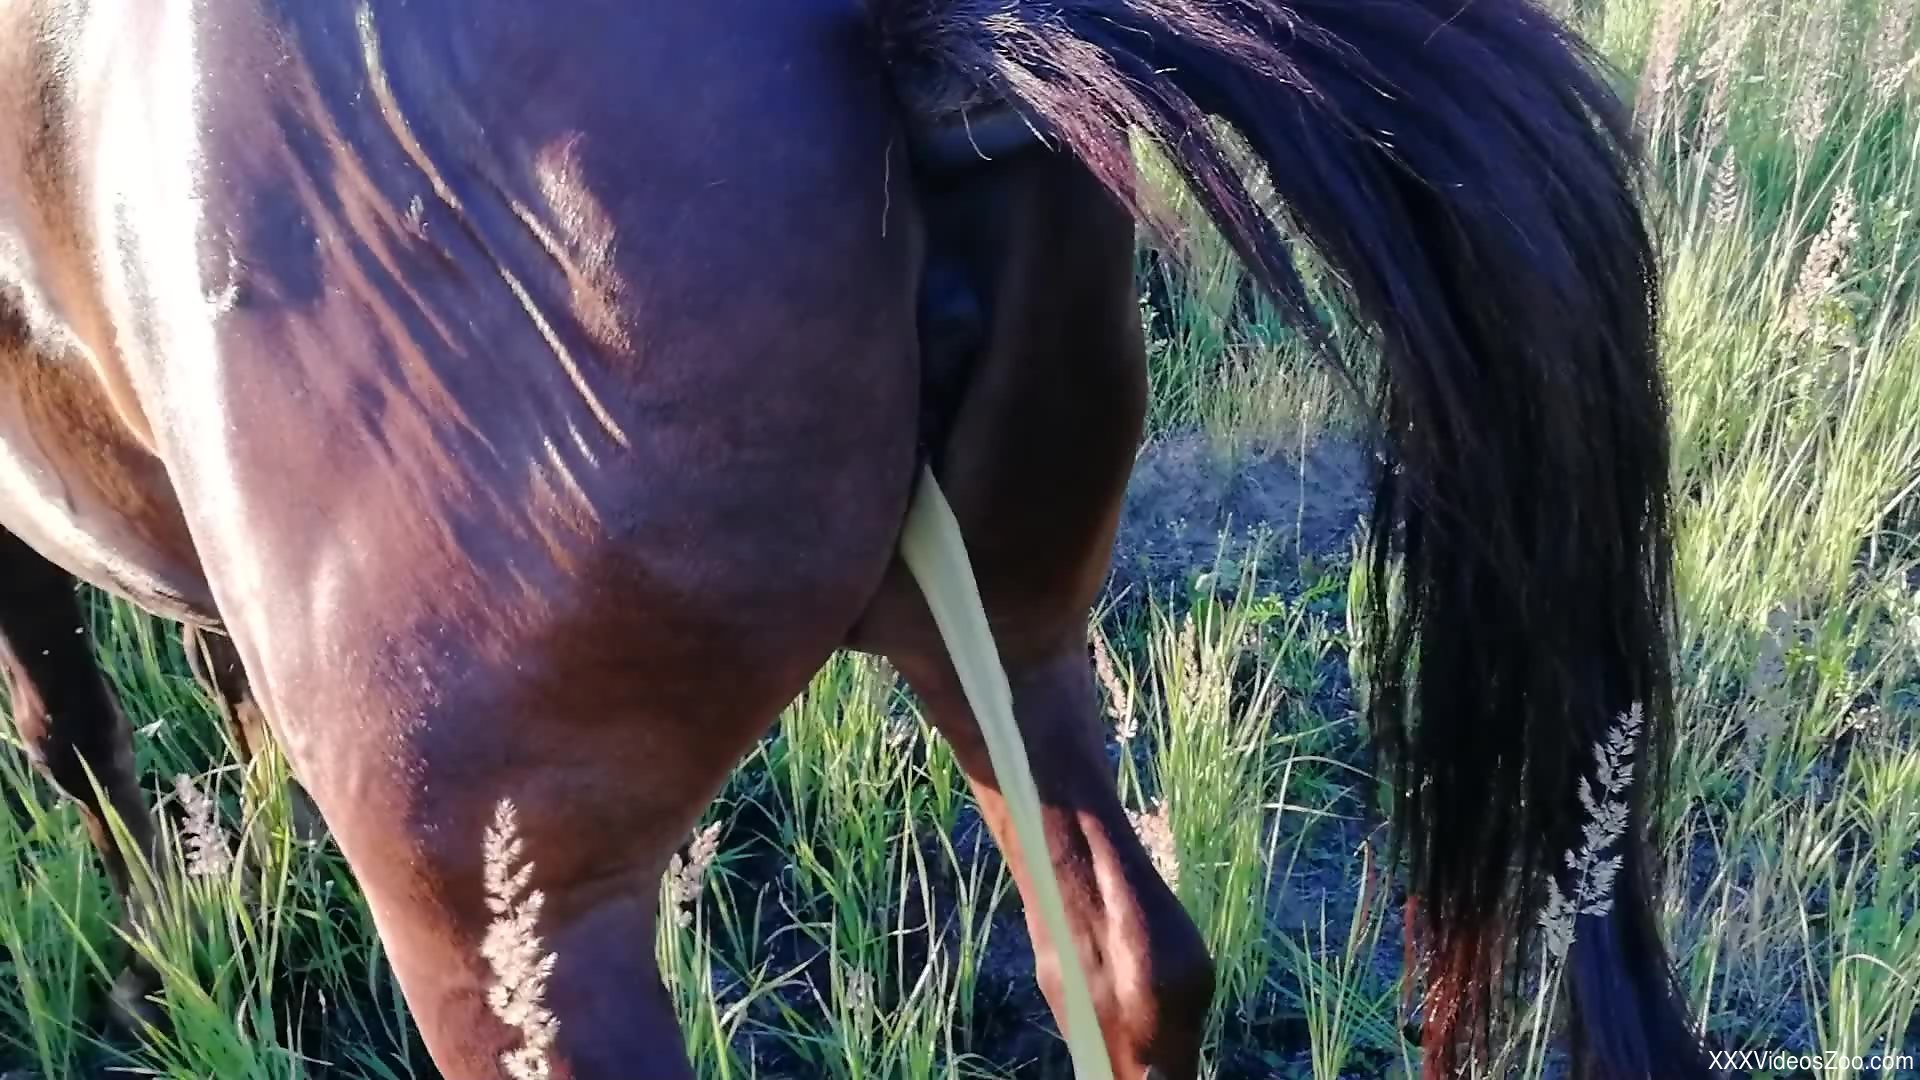 Horse Porn Squirt - Attractive horse pissing or squirting in a hot porno